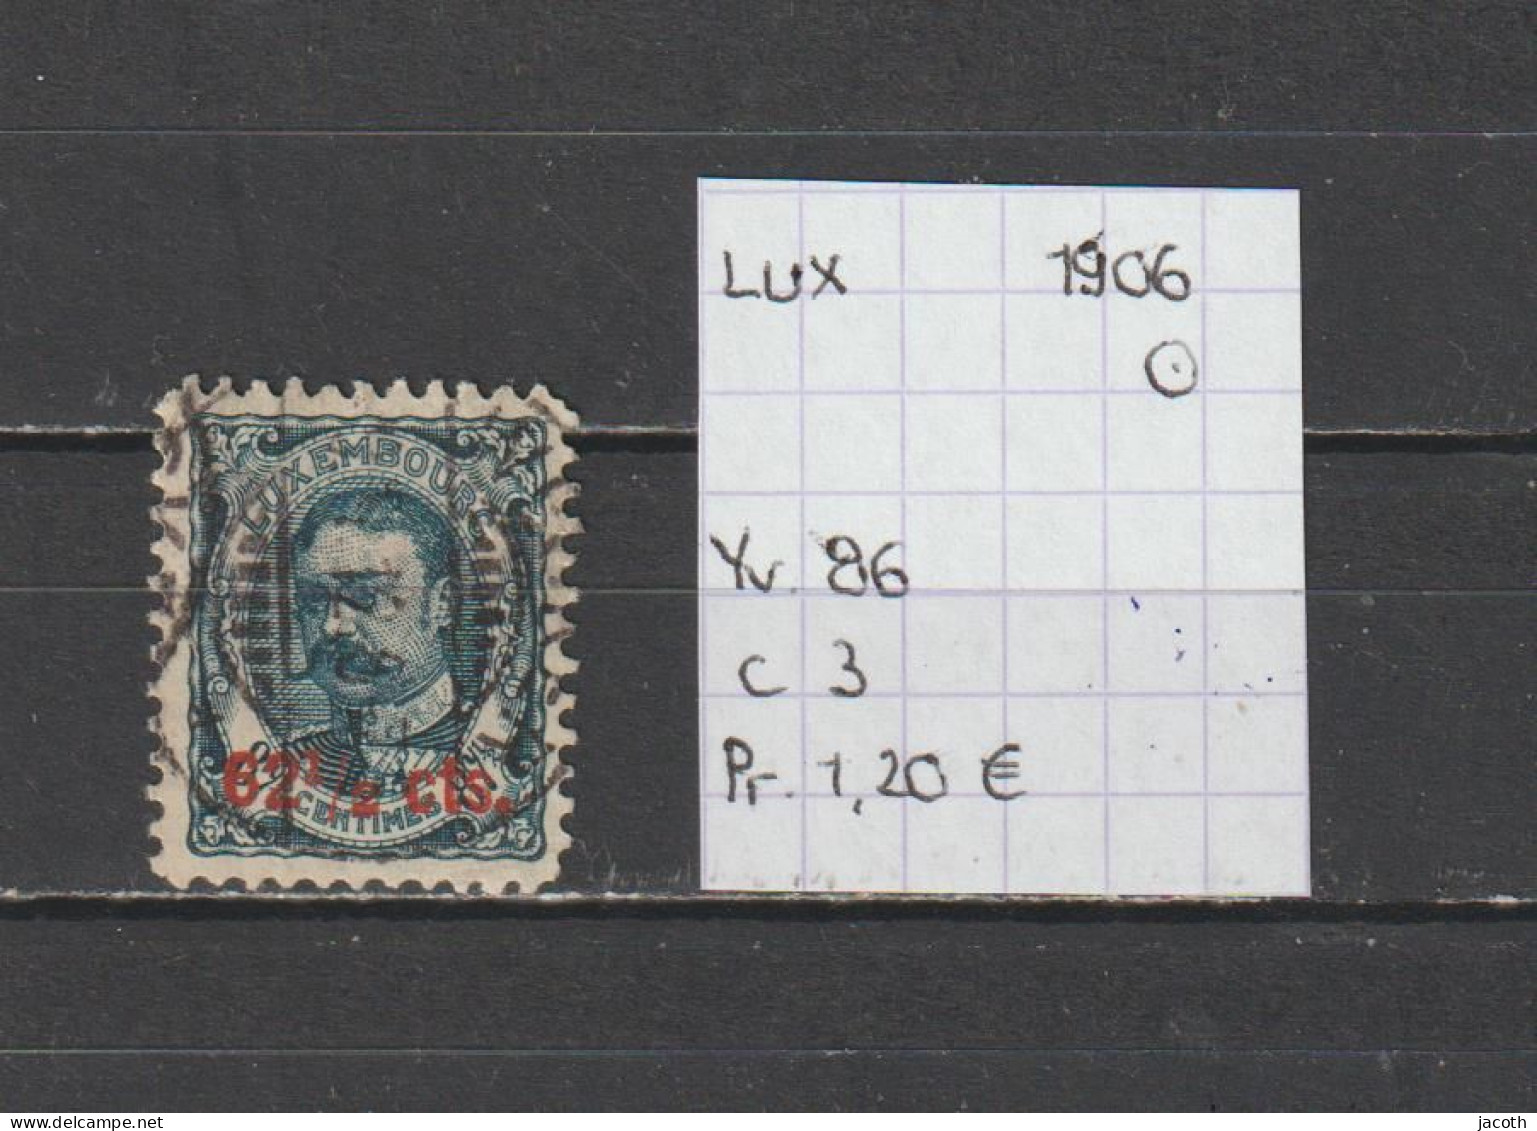 (TJ) Luxembourg 1906 - YT 86 (gest./obl./used) - 1906 Wilhelm IV.